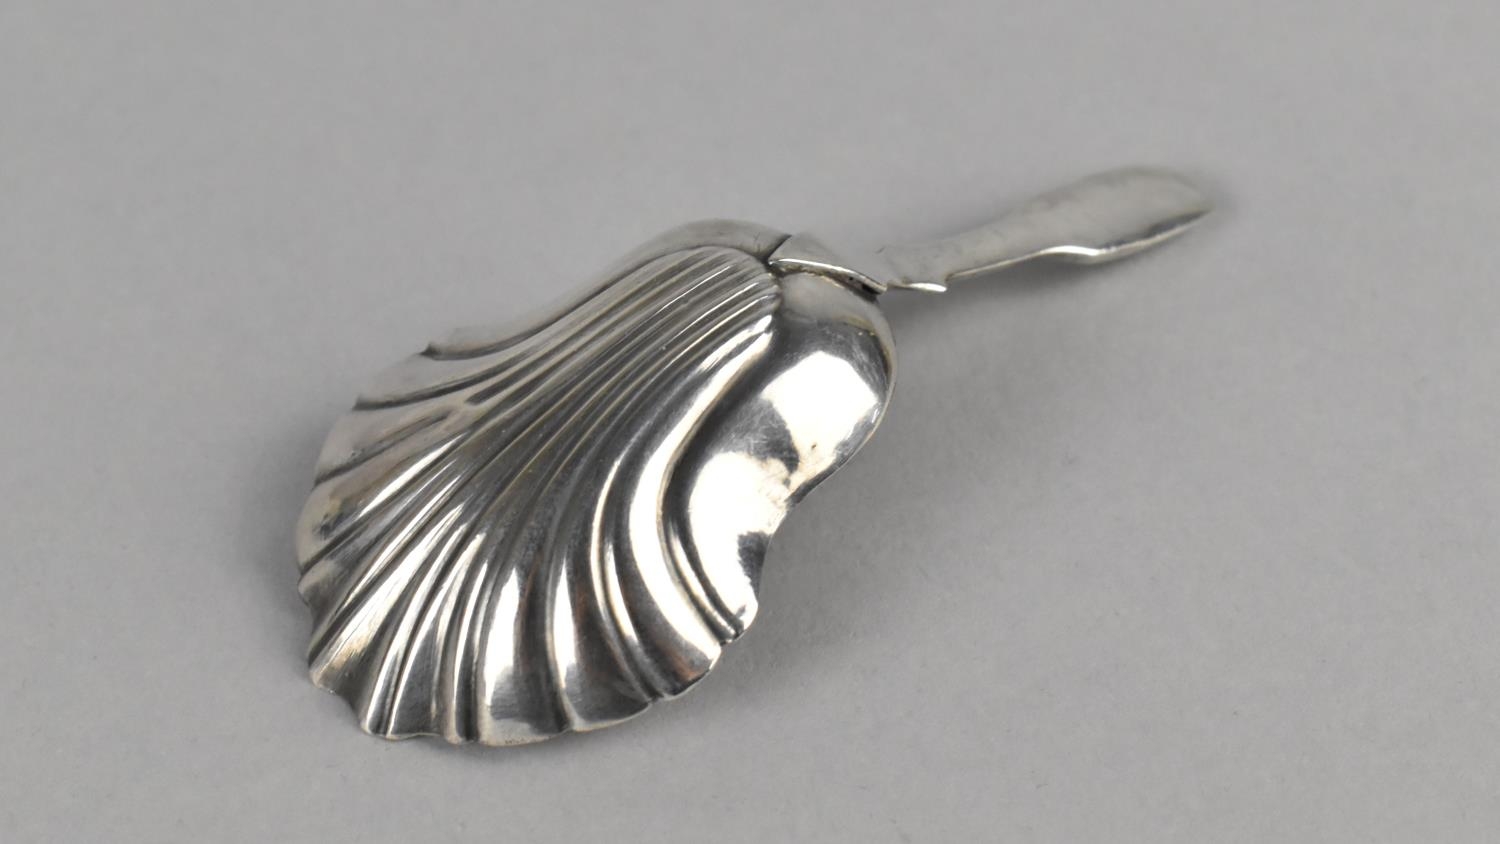 A Victorian Silver Caddy Spoon by Hilliard & Thomason, with Shell Shaped Bowl, Birmingham - Image 3 of 3